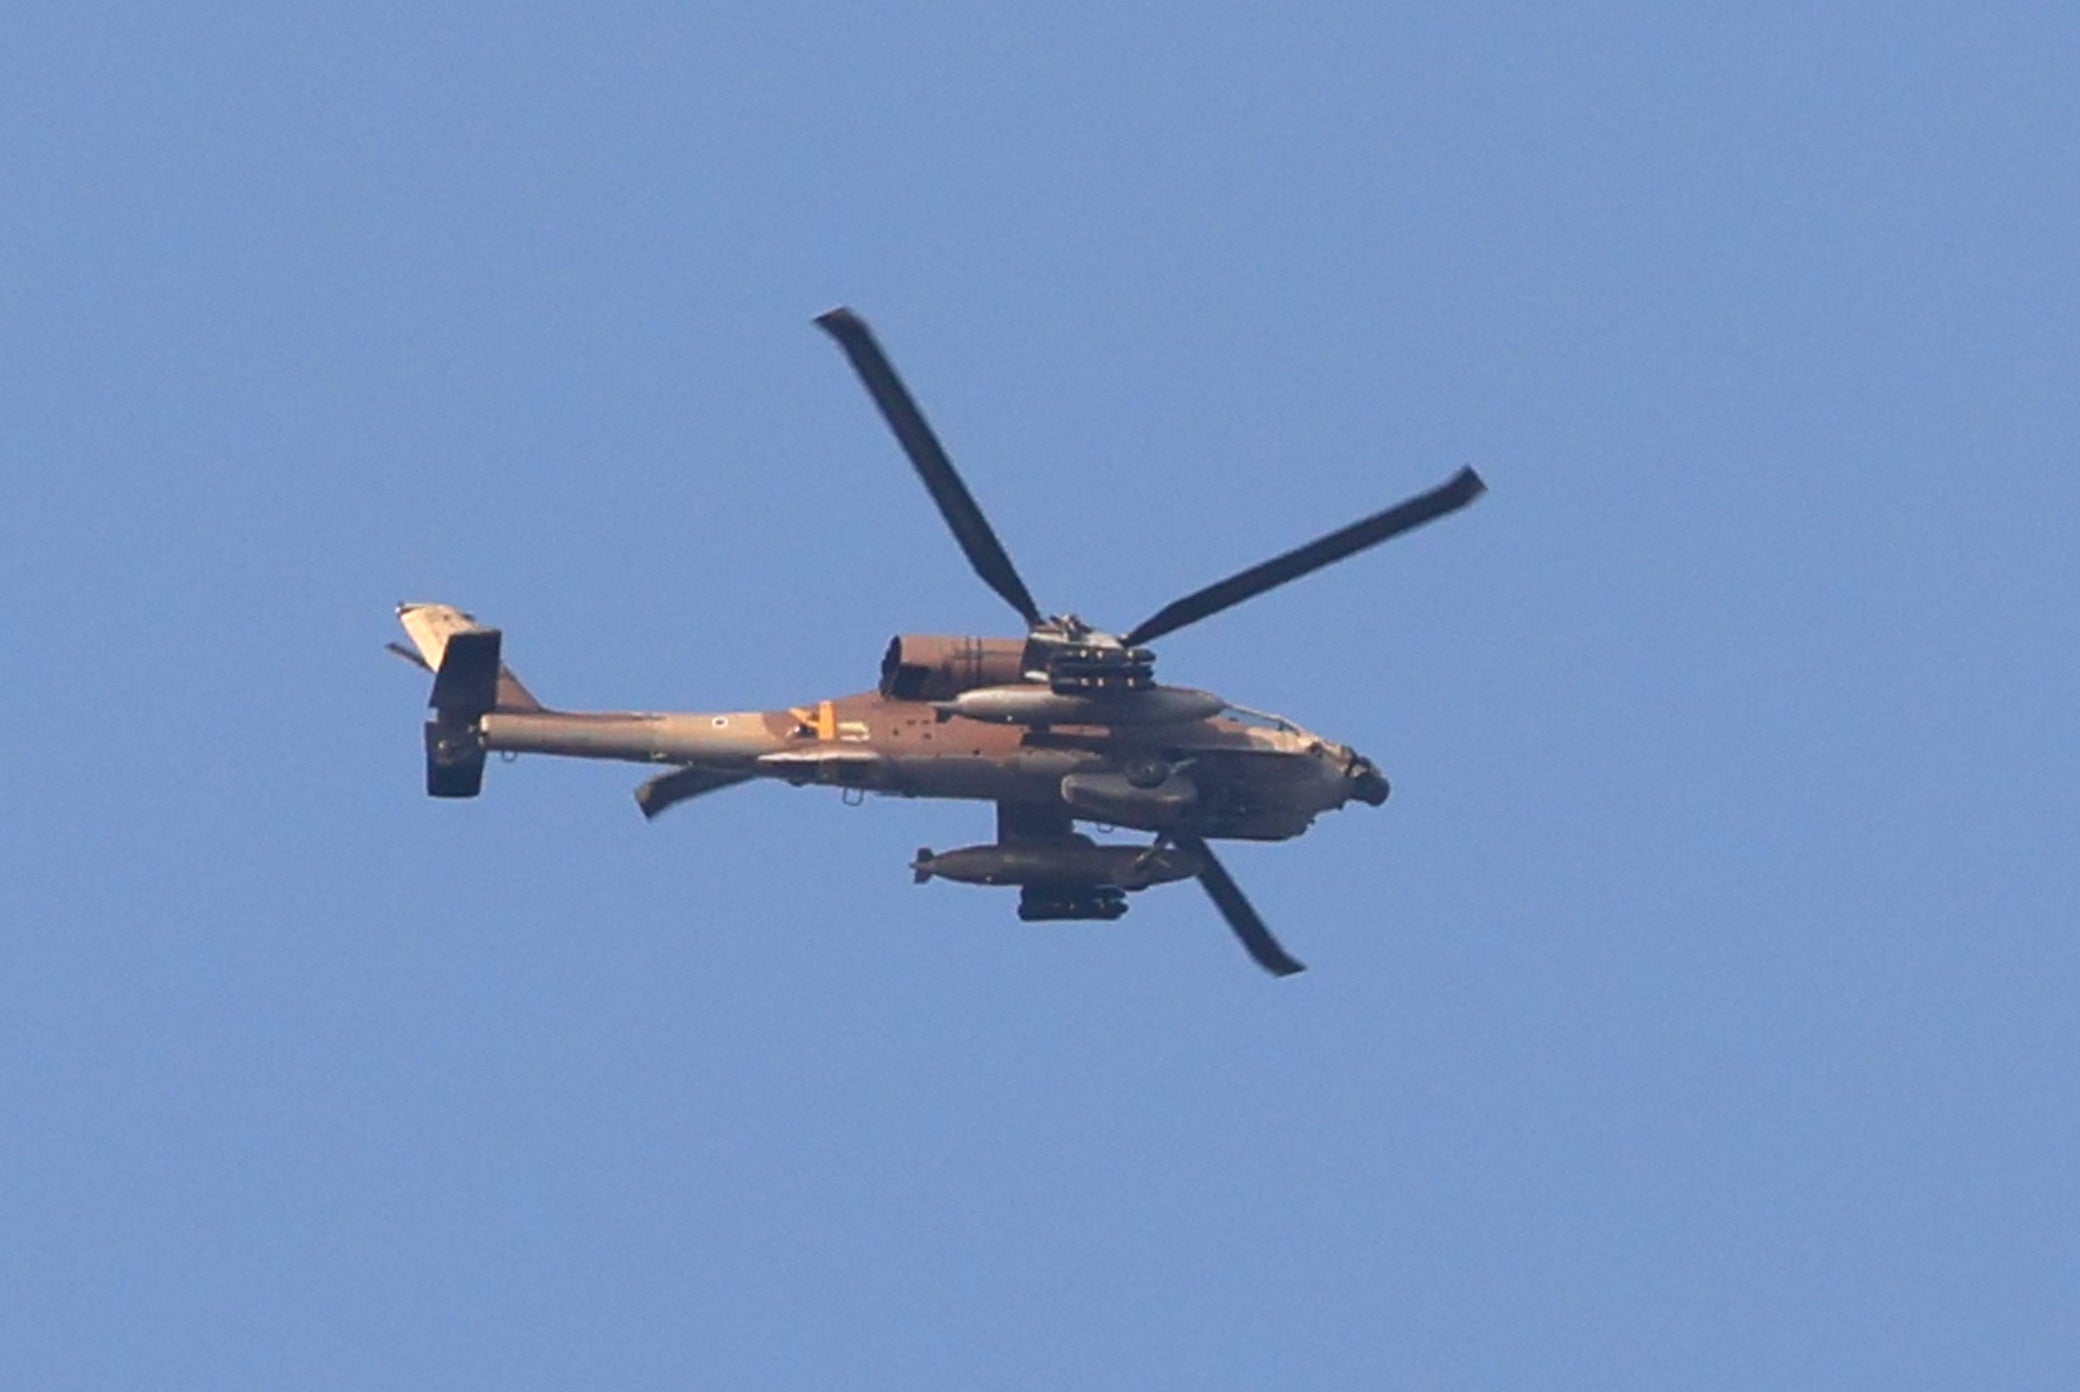 An Israeli Apache helicopter is pictured over the Israel's southern city of Ashkelon during an Israeli air strike on Gaza City, on August 5, 2022. - A senior militant from Islamic Jihad was killed in an Israeli air strike on the Gaza Strip today, prompting the militant group to warn Israel has "started a war".
A child was among those killed in the strikes, the enclave's health ministry said, while Israel's military estimated 15 were dead. (Photo by JACK GUEZ / AFP) (Photo by JACK GUEZ/AFP via Getty Images)